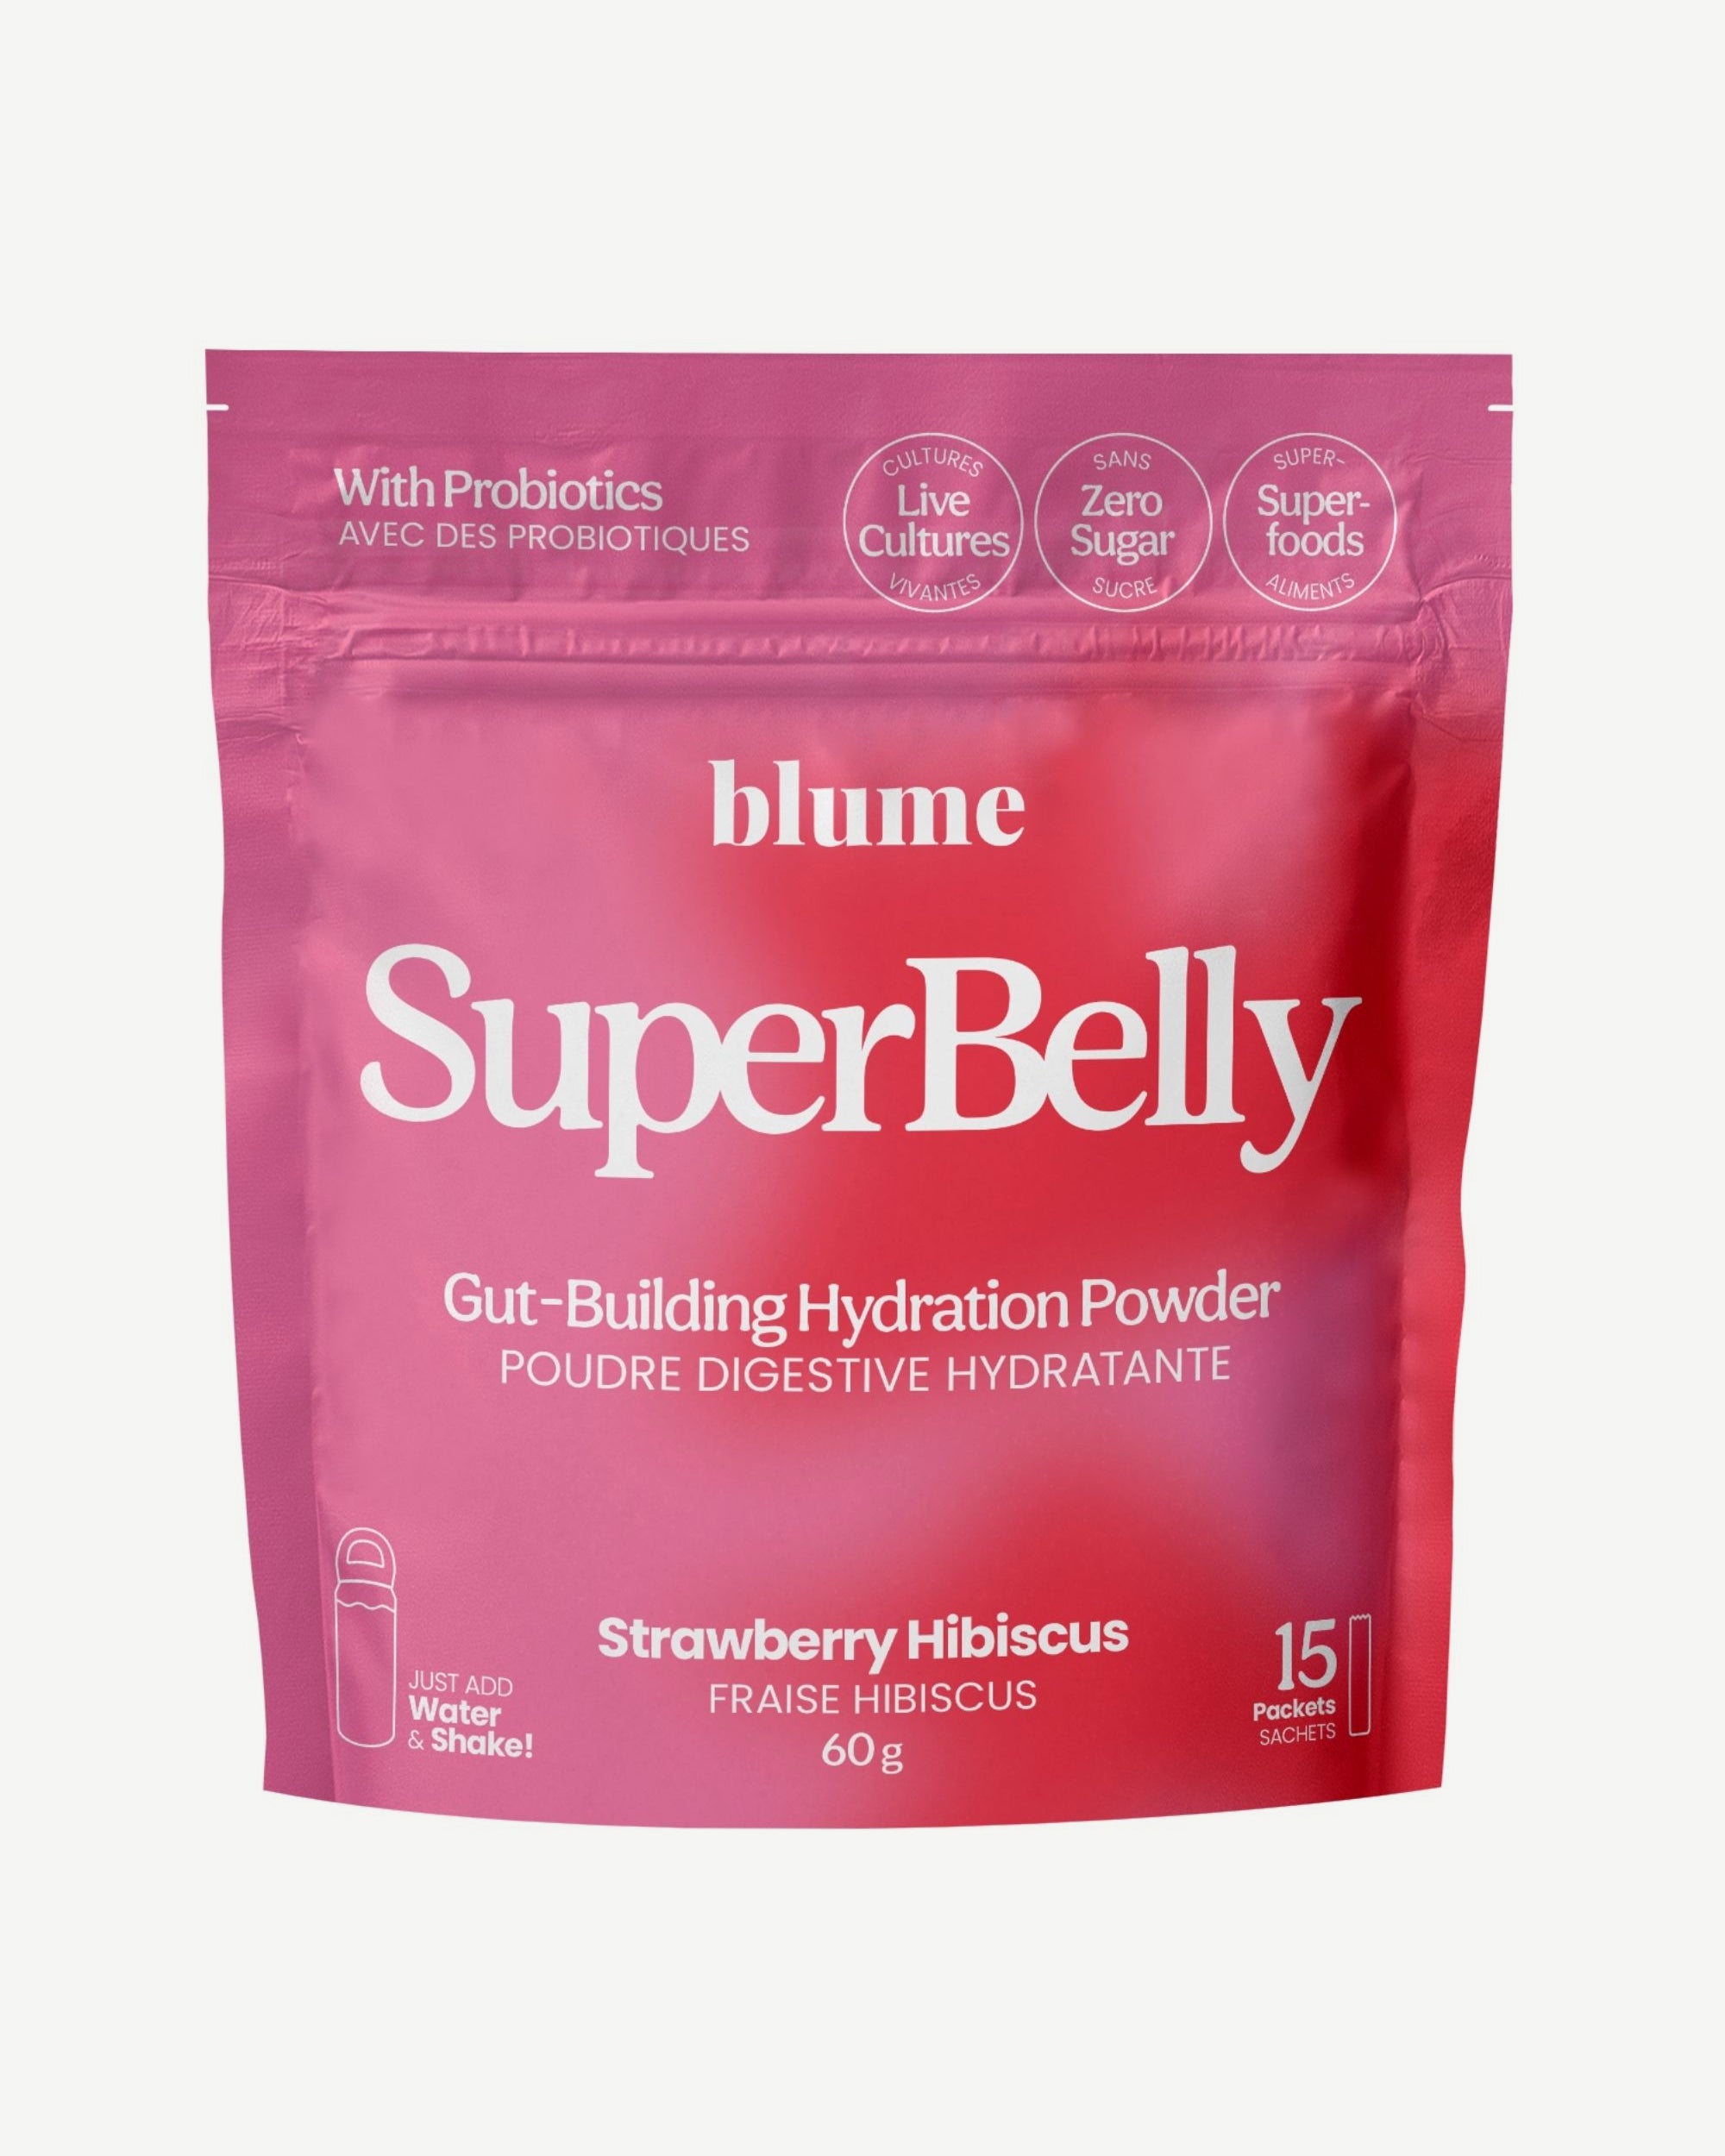 SuperBelly Gut-Building Hydration Powder - Strawberry Hibiscus